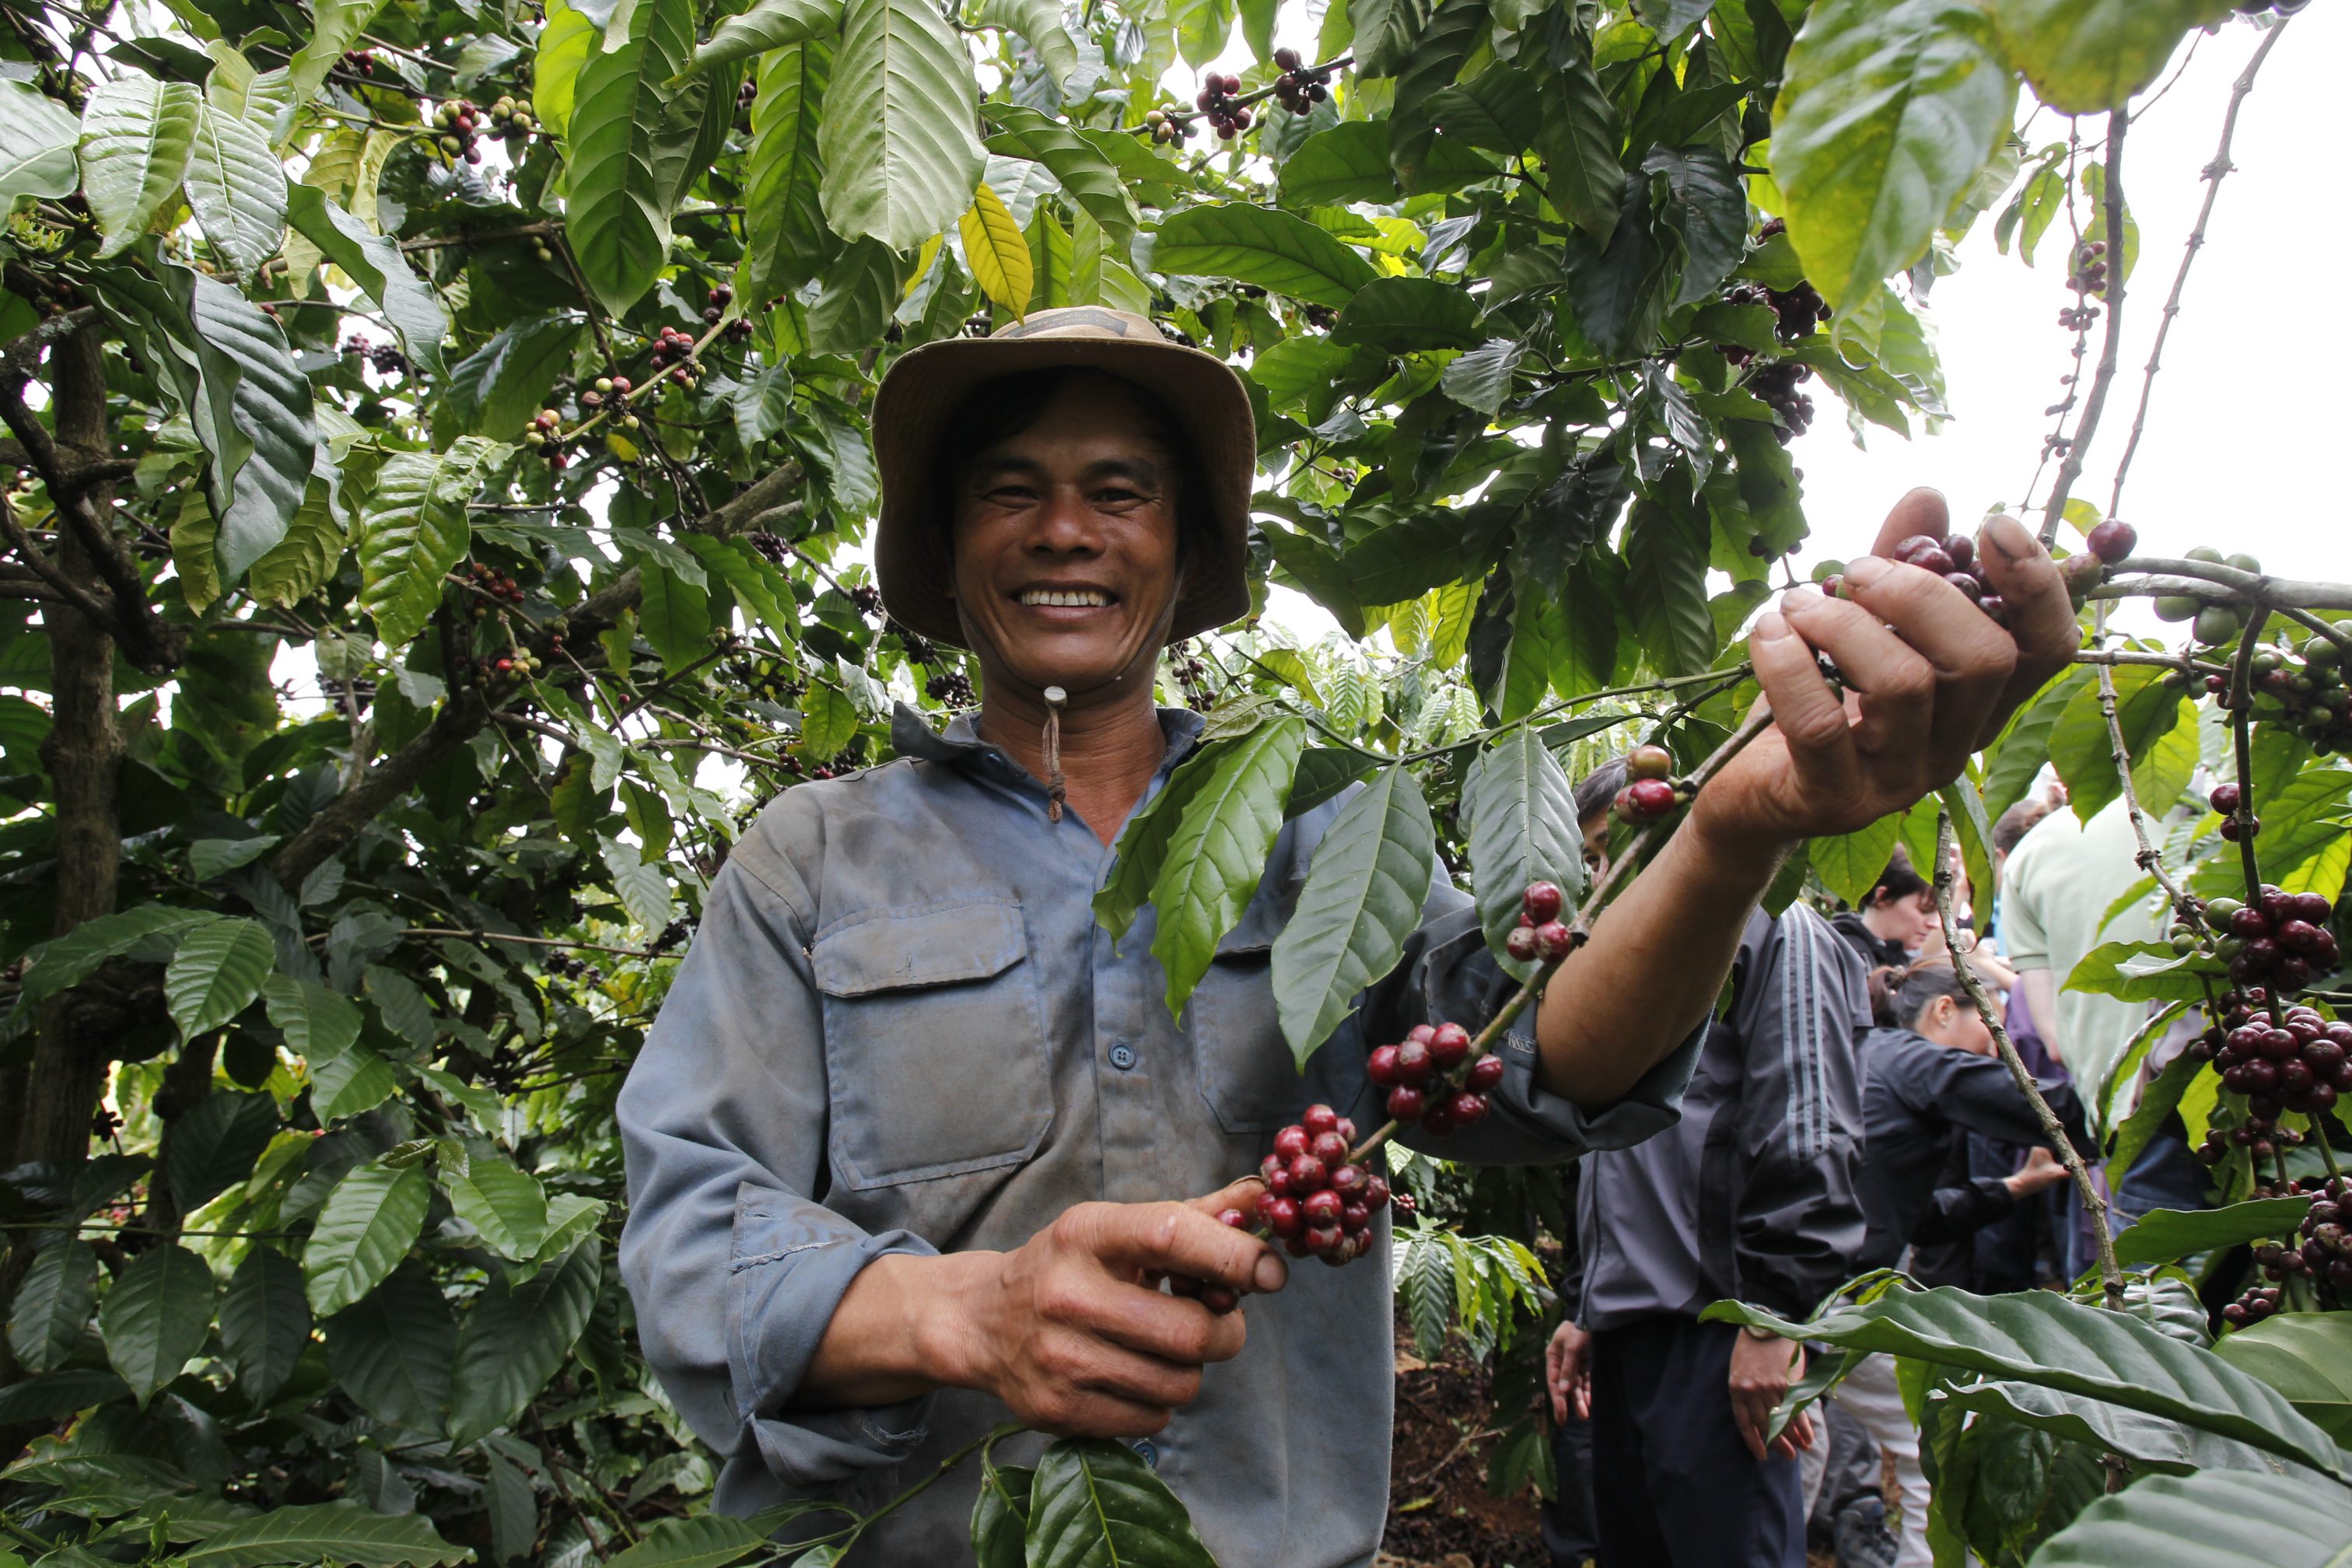 Source or sink: The carbon footprint of Vietnam robusta coffee - IDH ...